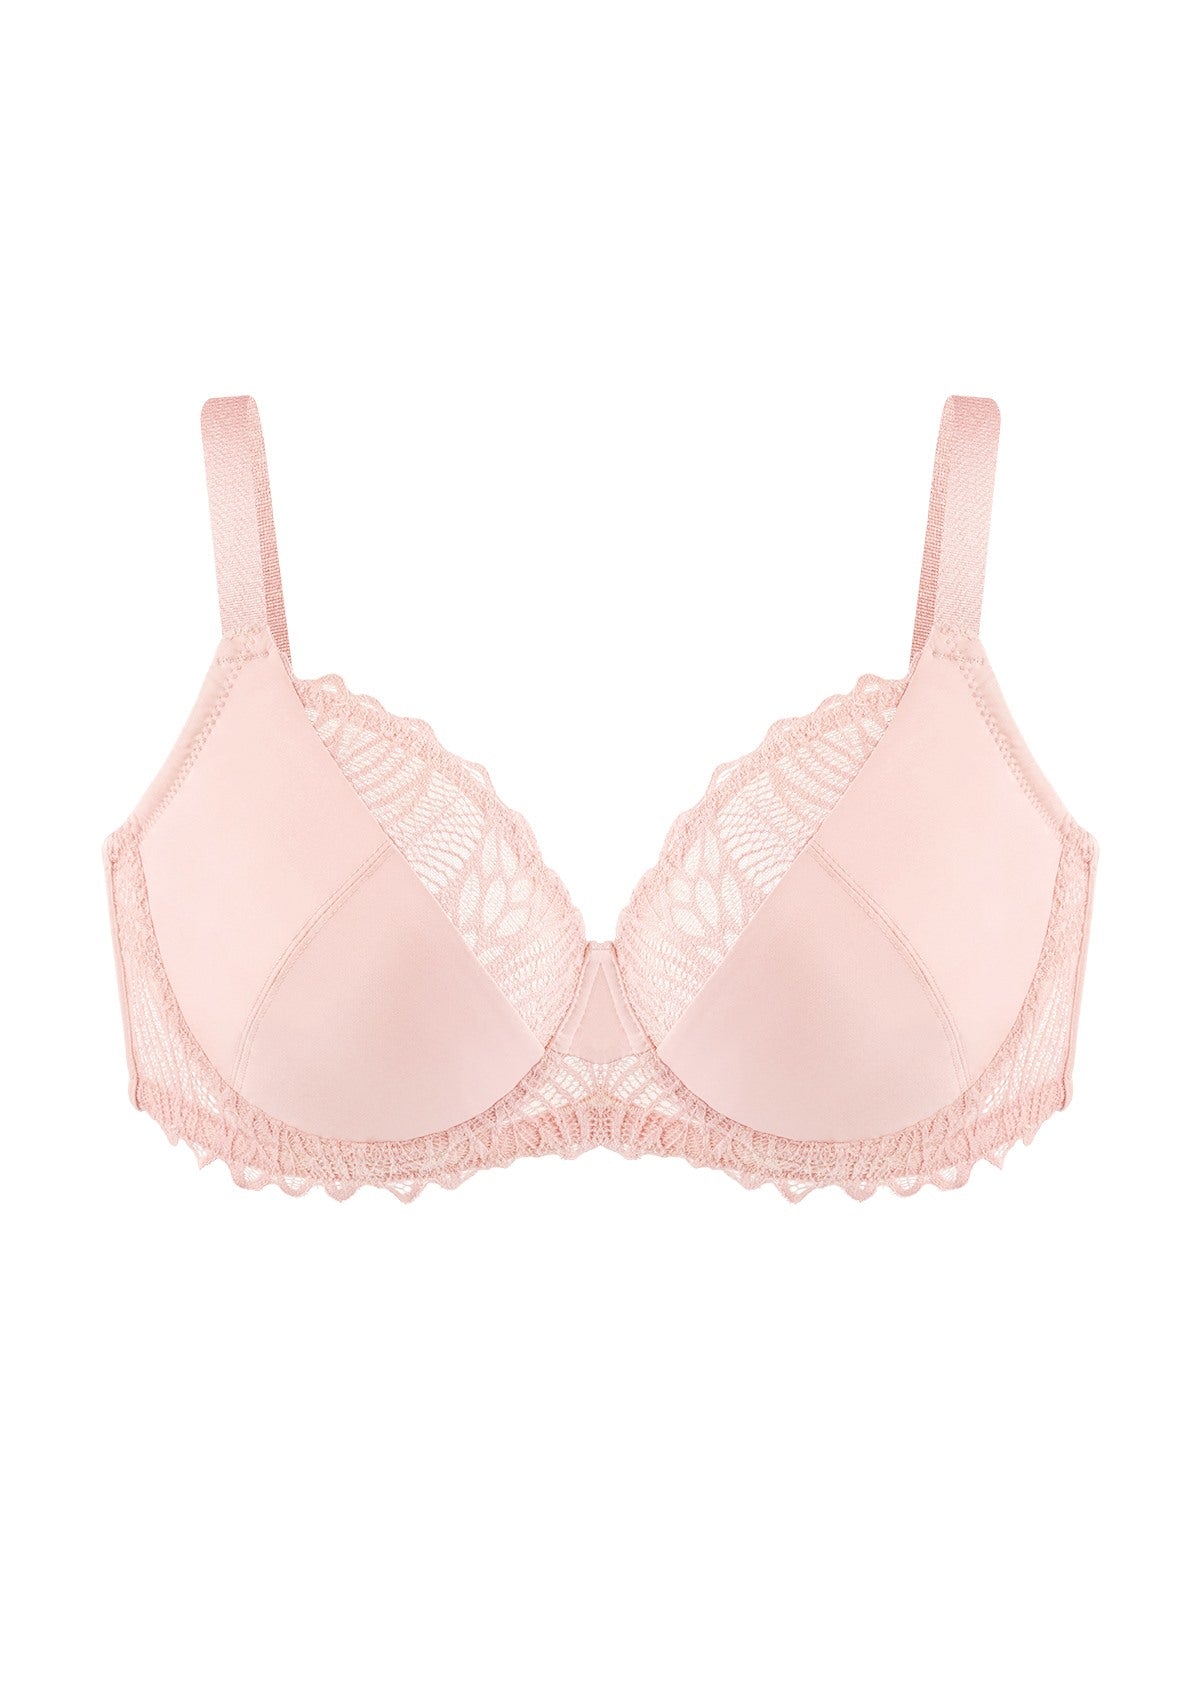 HSIA Pretty Secrets Lace-Trimmed Full Coverage Underwire Bra For Support - Light Pink / 44 / C